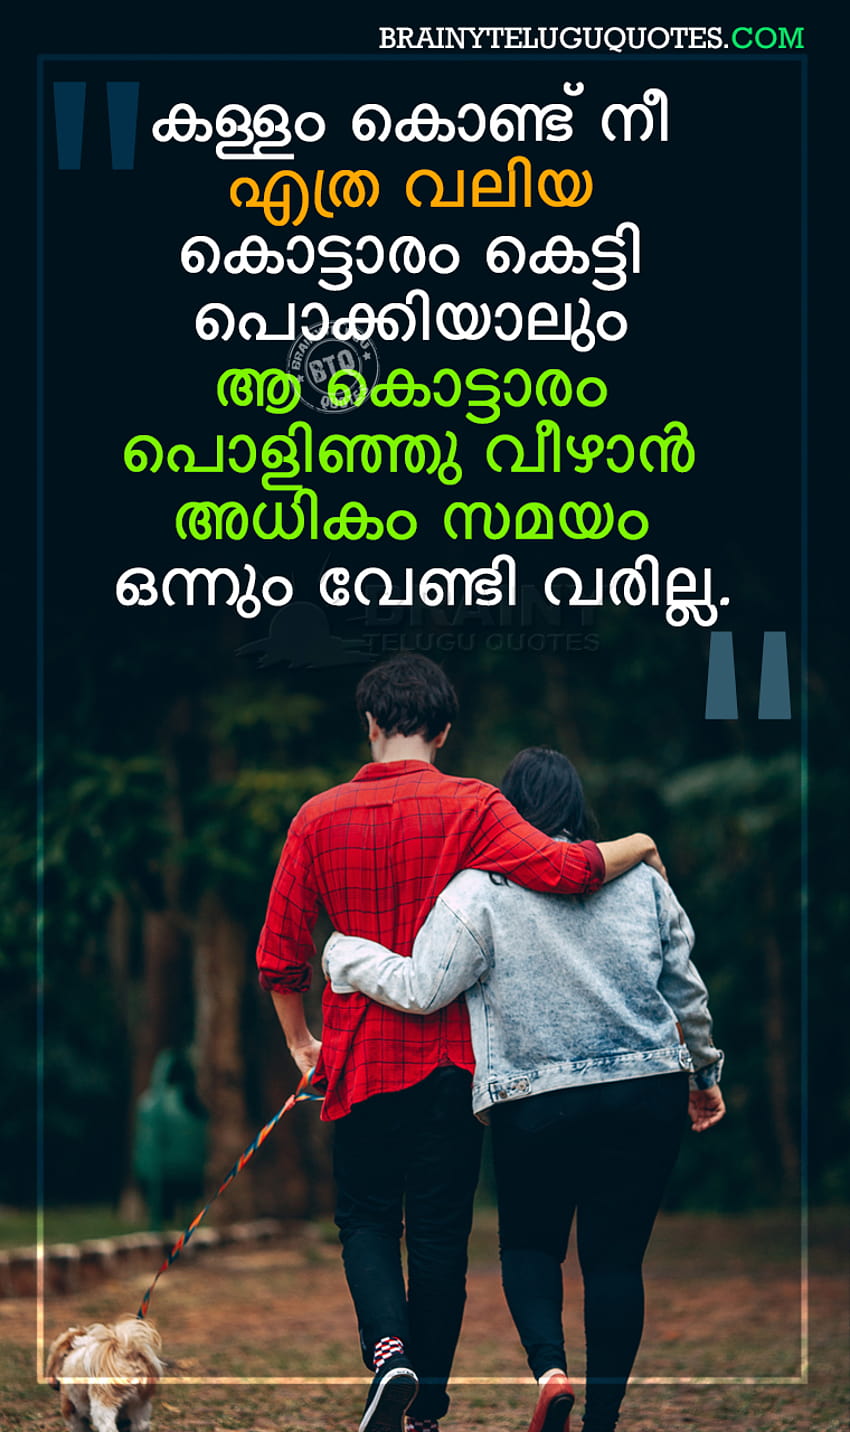 sad friendship quotes that make you cry in malayalam